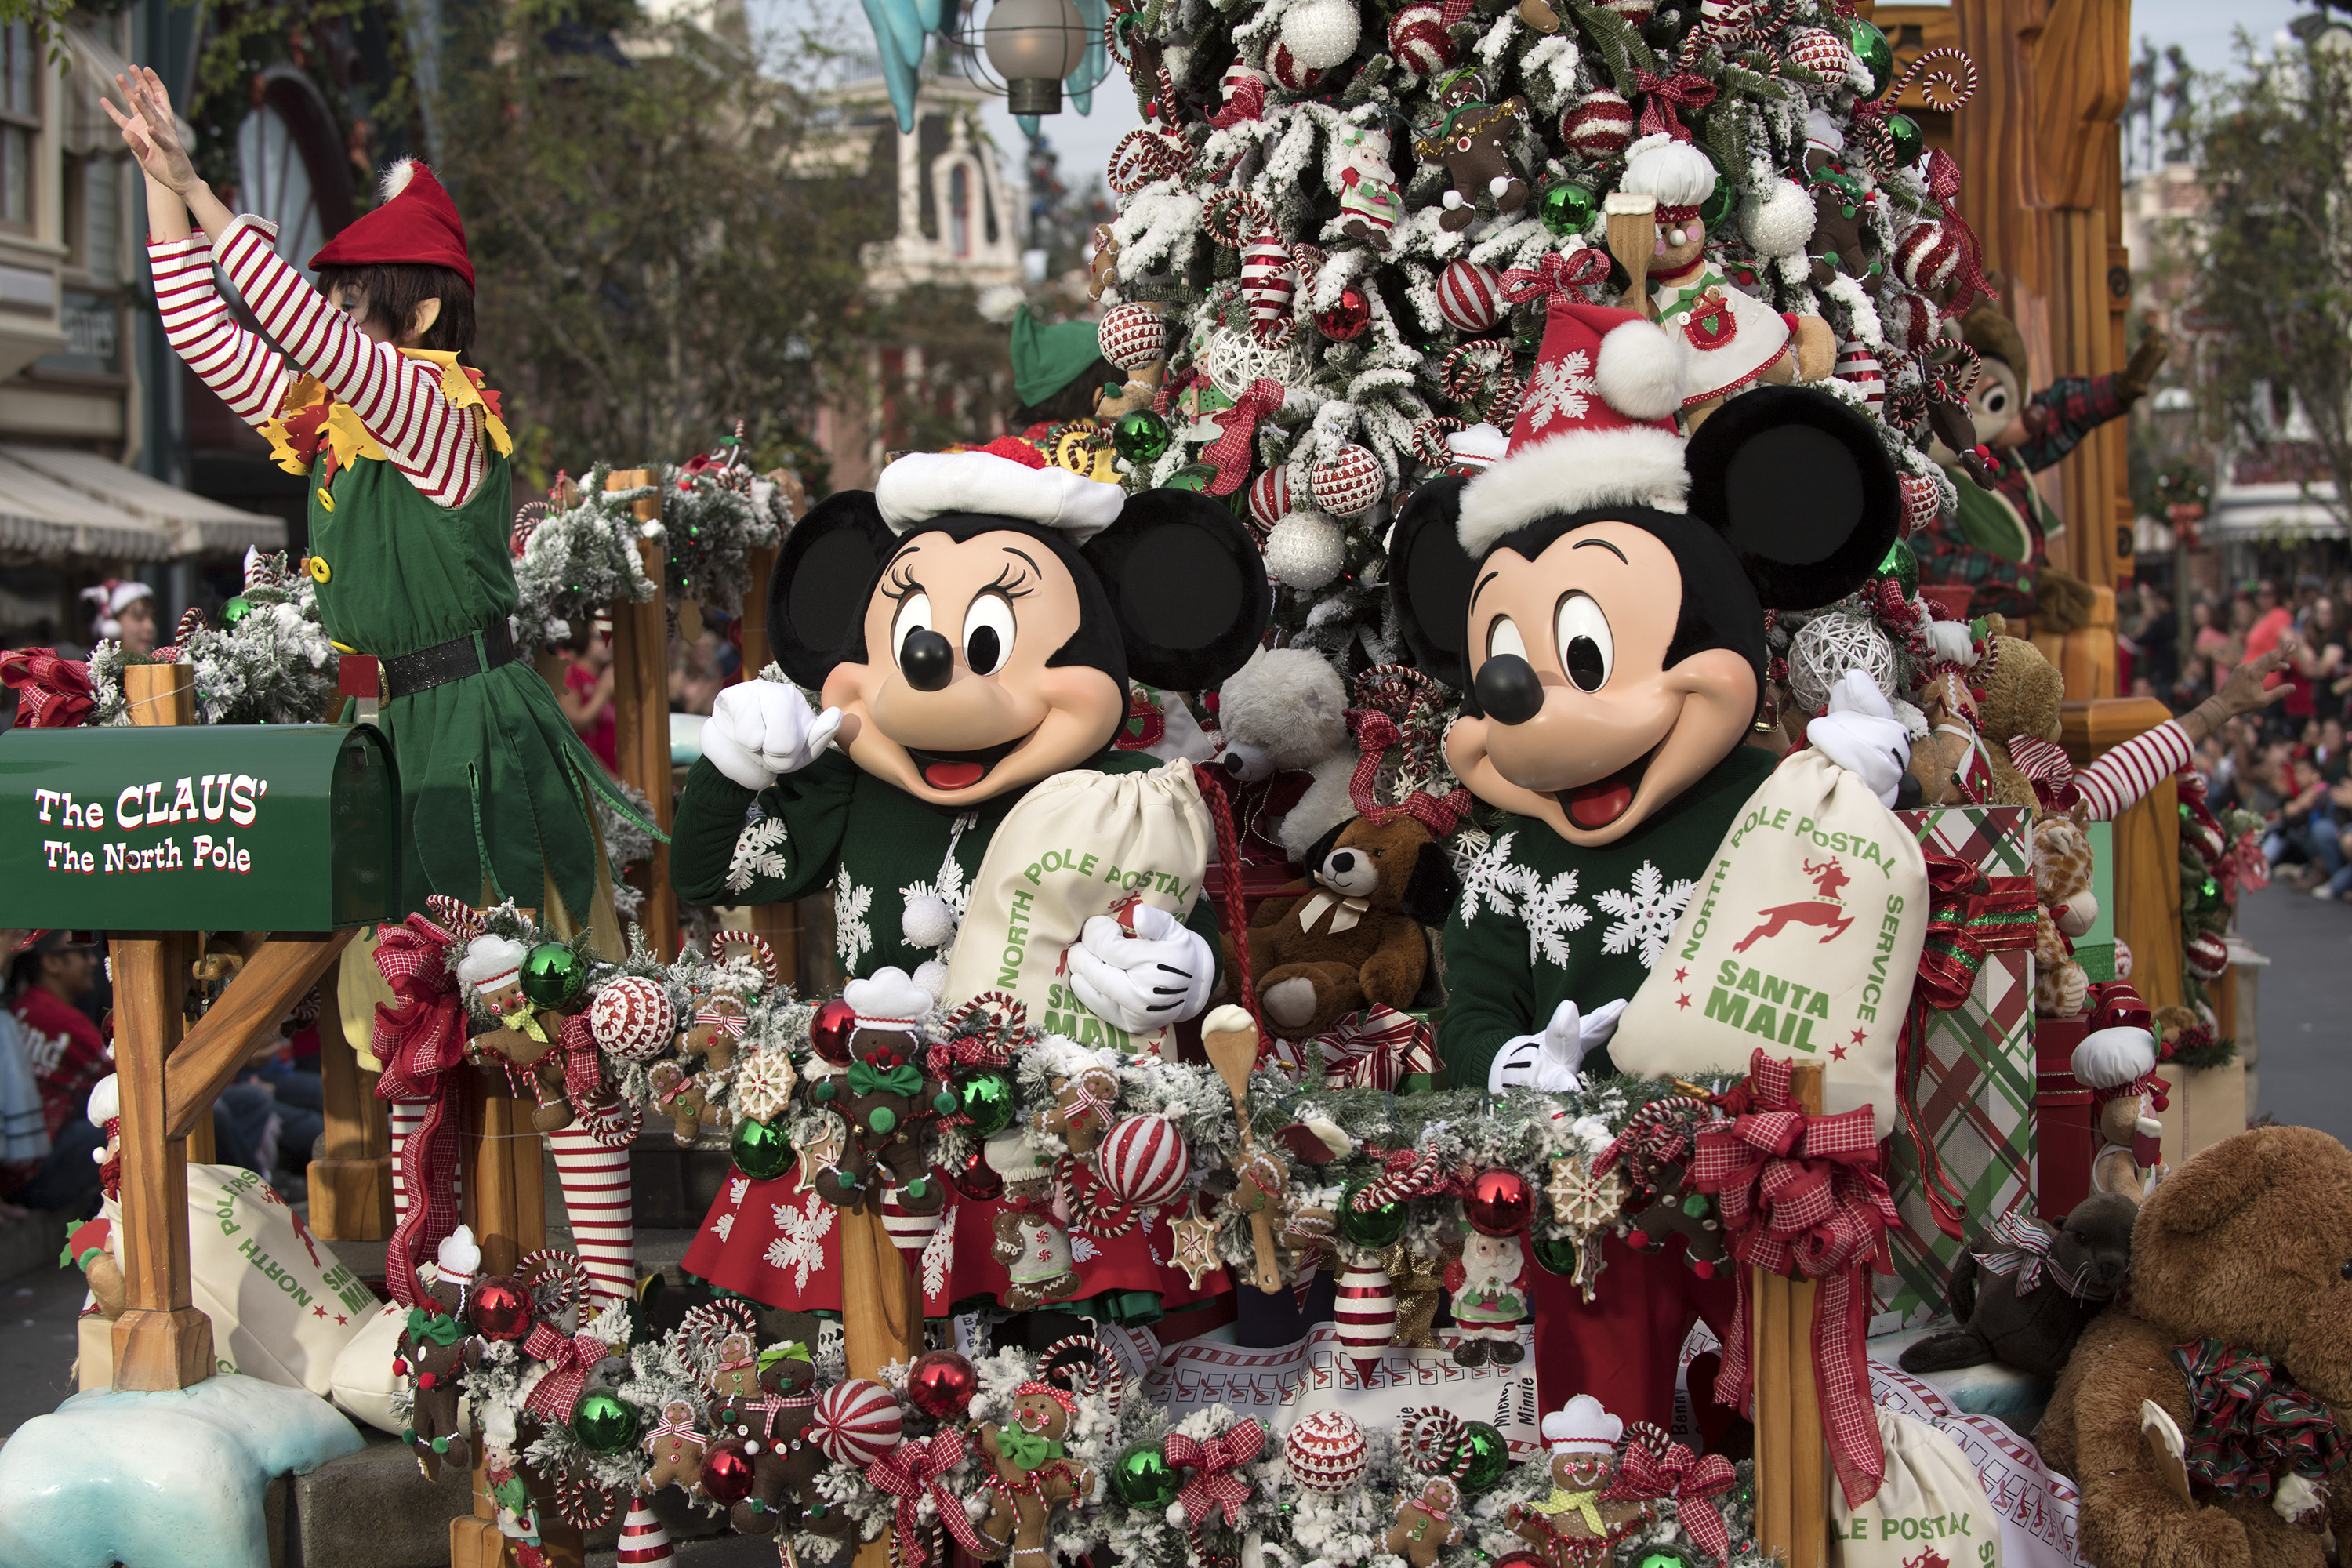 Disney Parks Magical Christmas Celebration Is Here! ABC